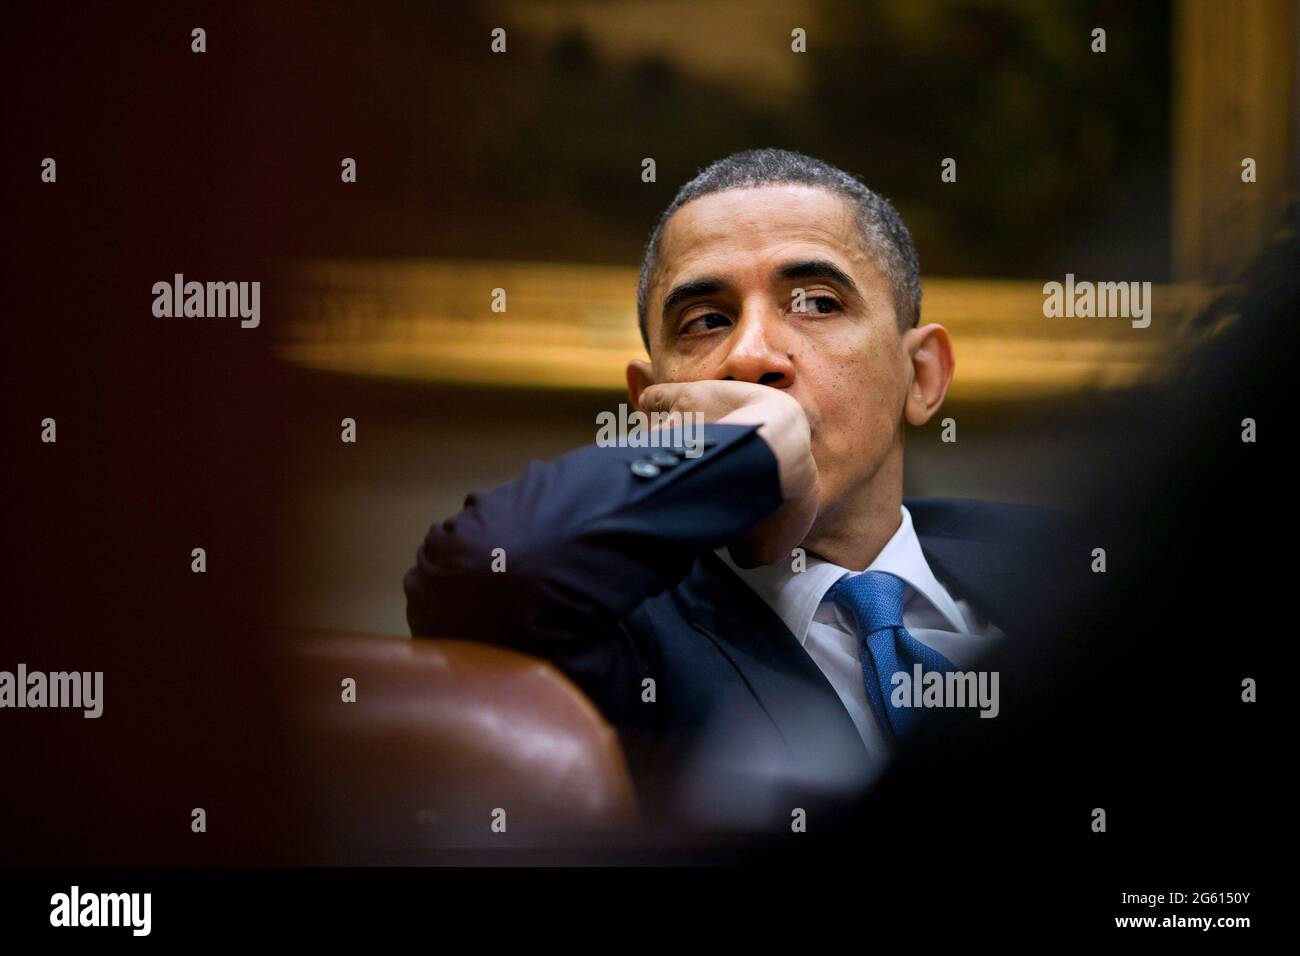 WASHINGTON DC, USA - 22 December 2010 - US President Barack Obama listens during a meeting with his staff in the Roosevelt Room of the White House in Stock Photo